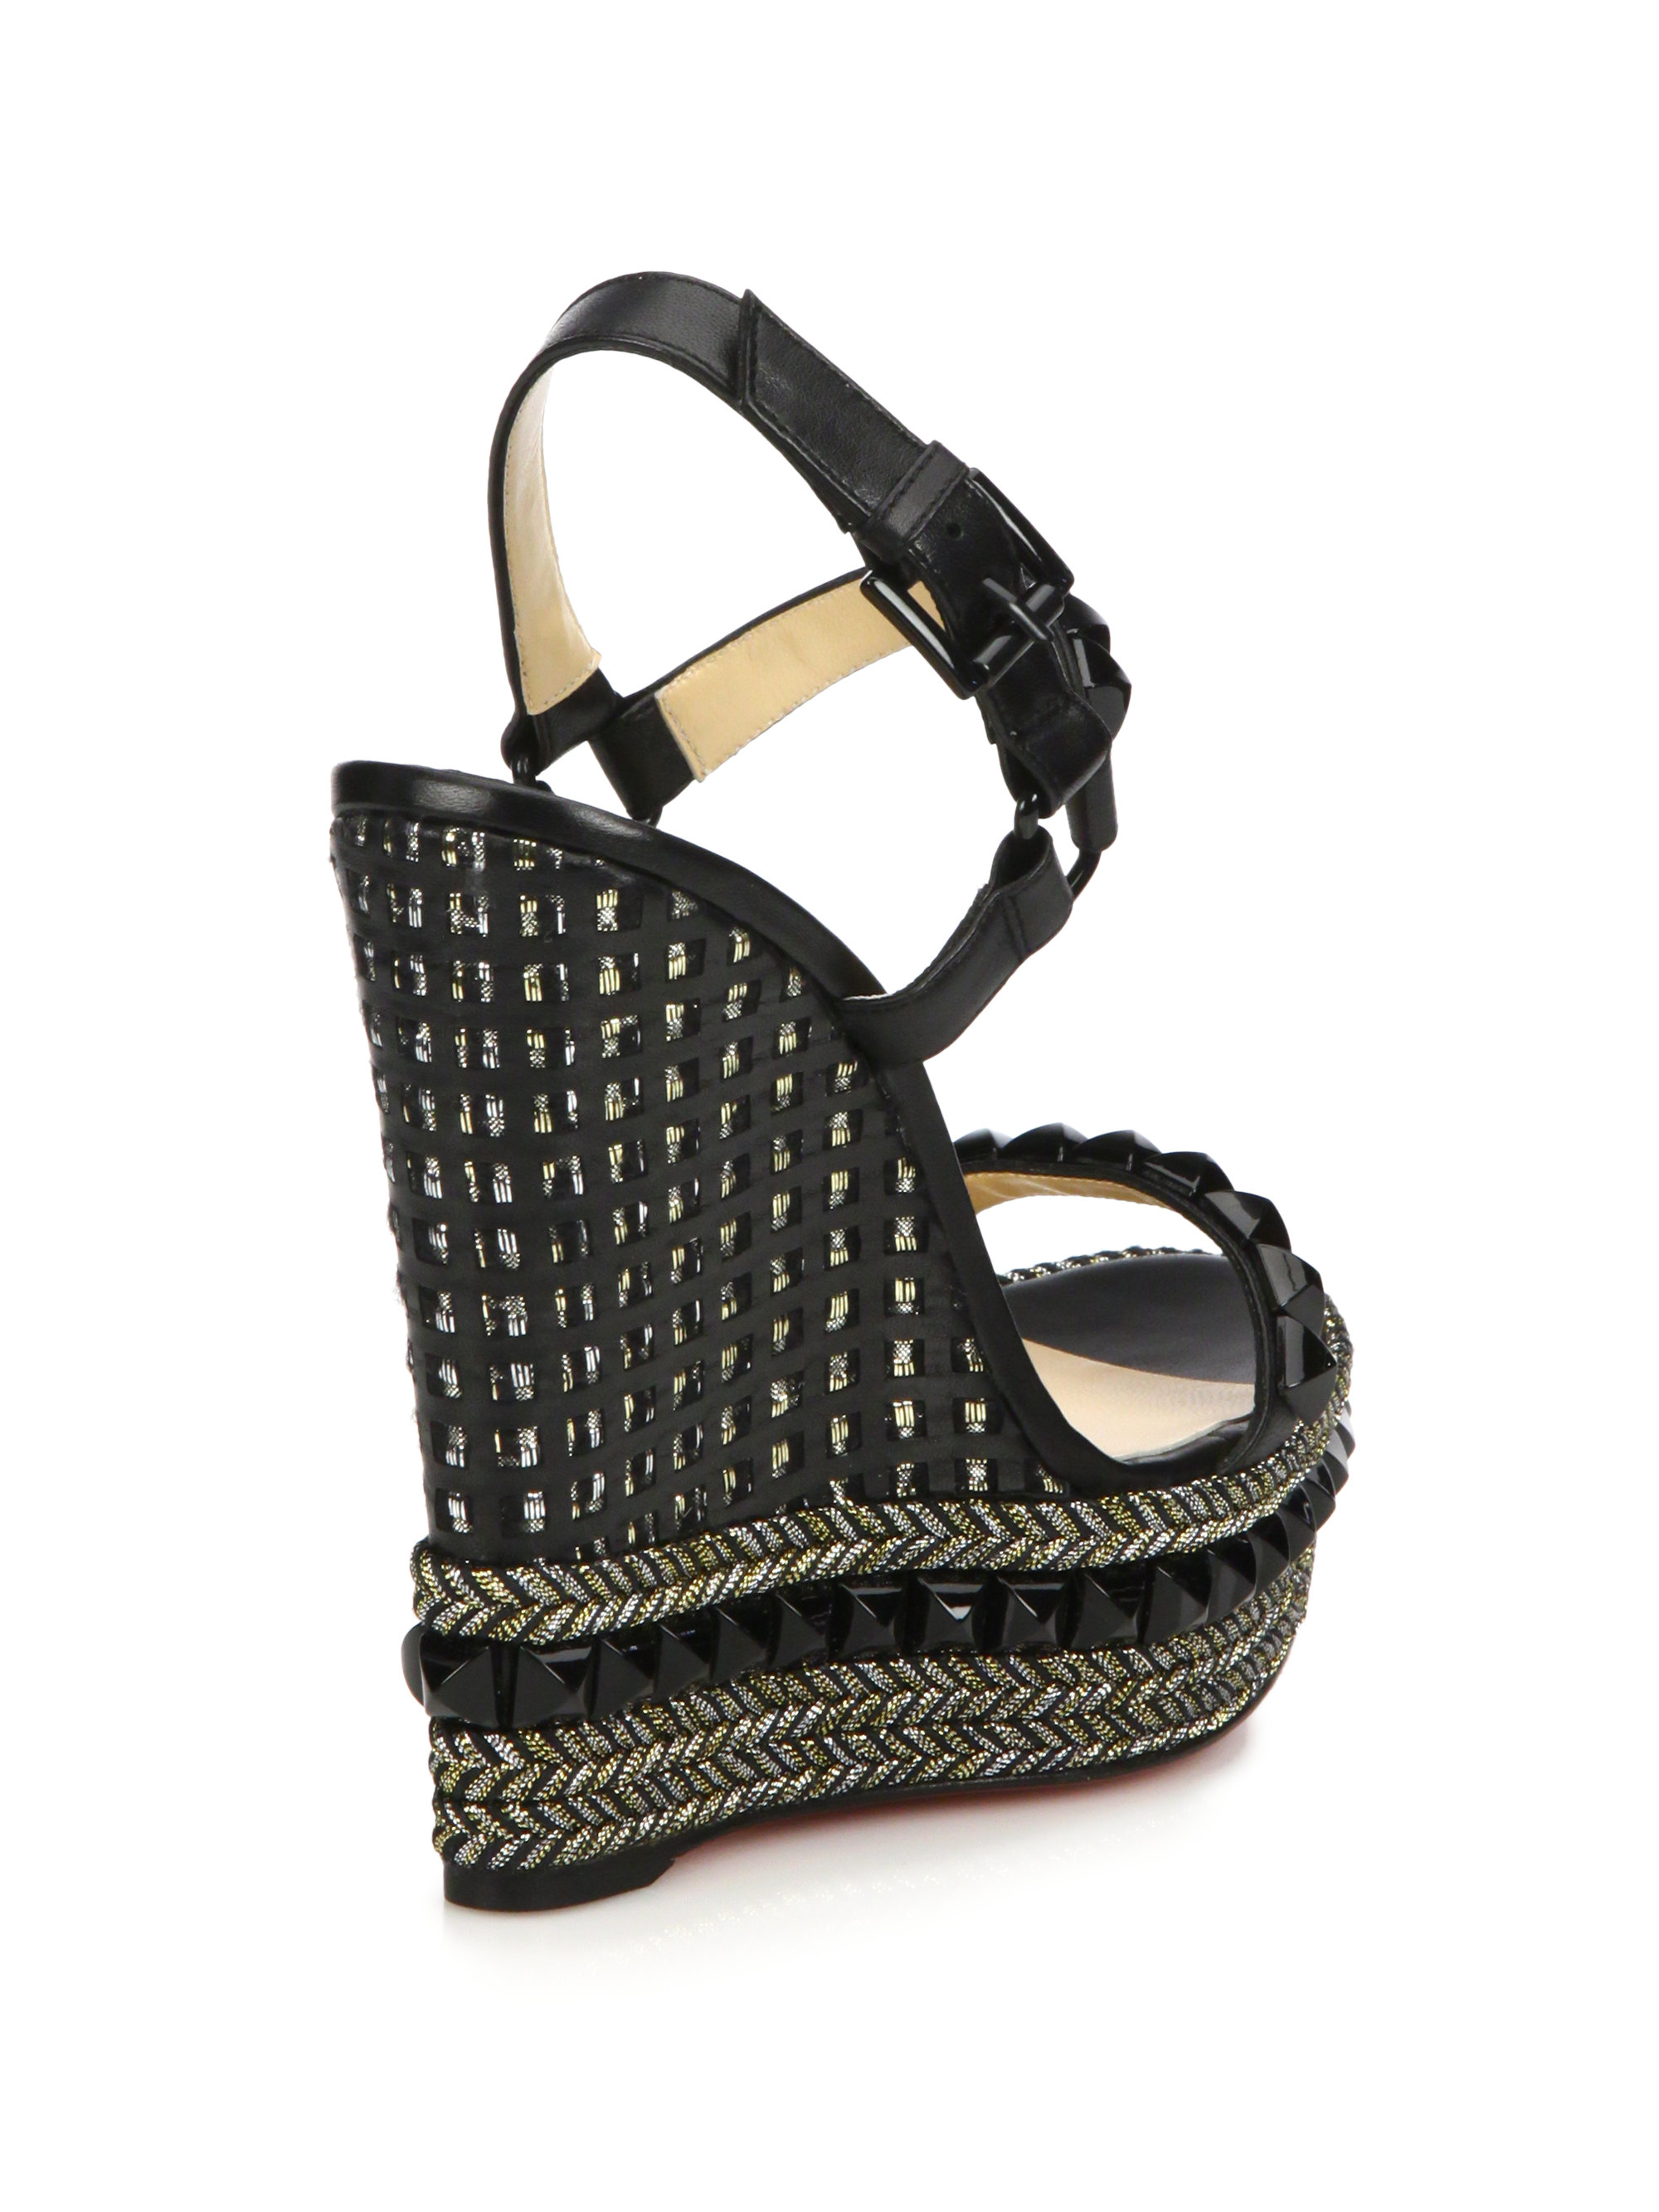 christian louboutin cataclou studded leather wedge sandals ...